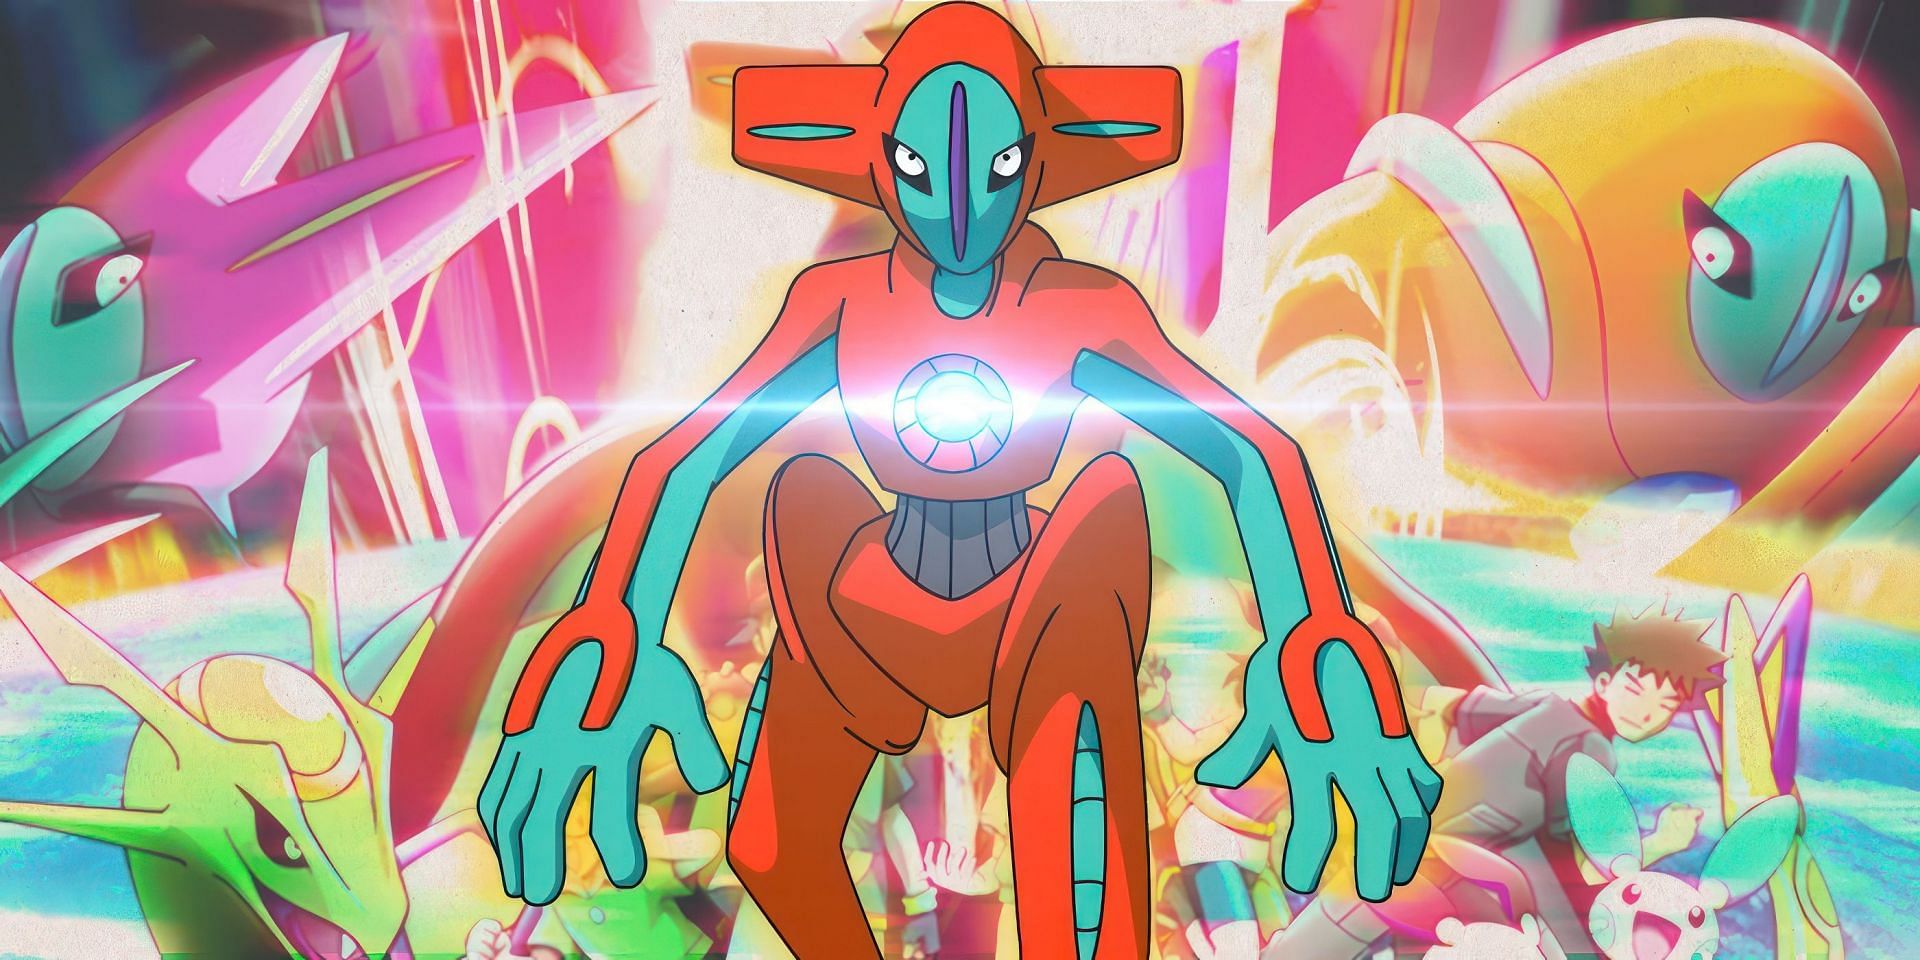 Deoxys as seen in the anime (Image via The Pokemon Company)